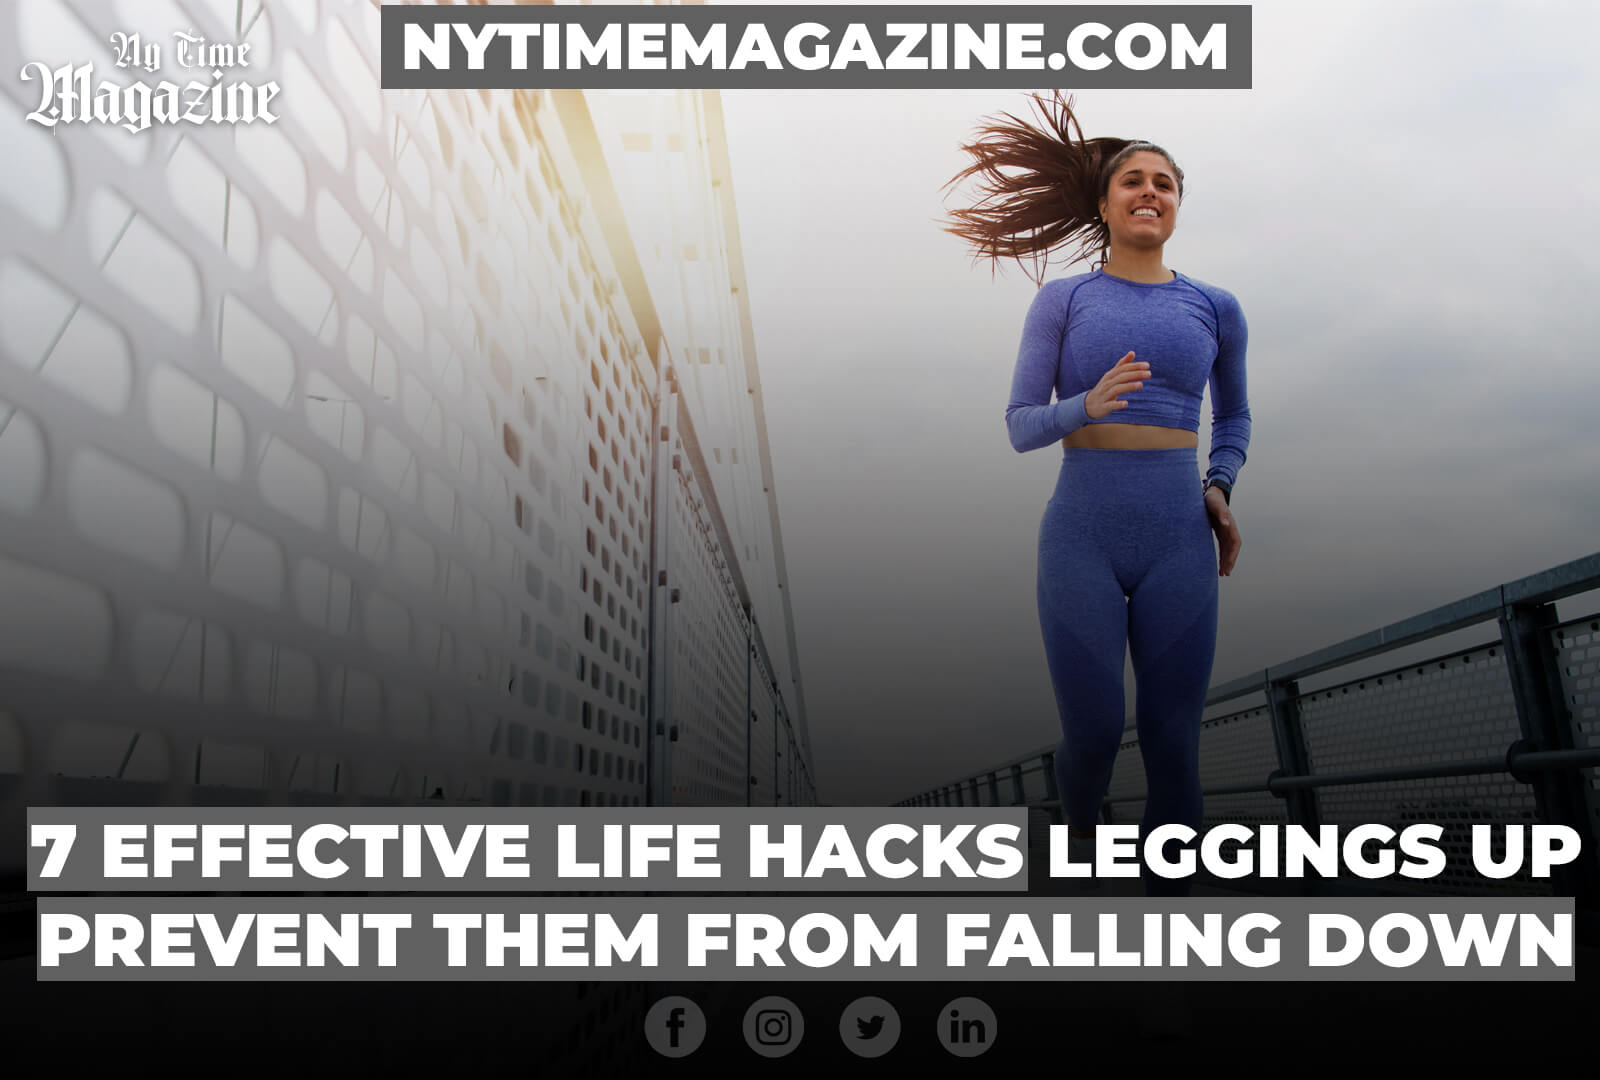 7 Effective Life Hacks to Keep Leggings Up and Prevent Them from Falling Down